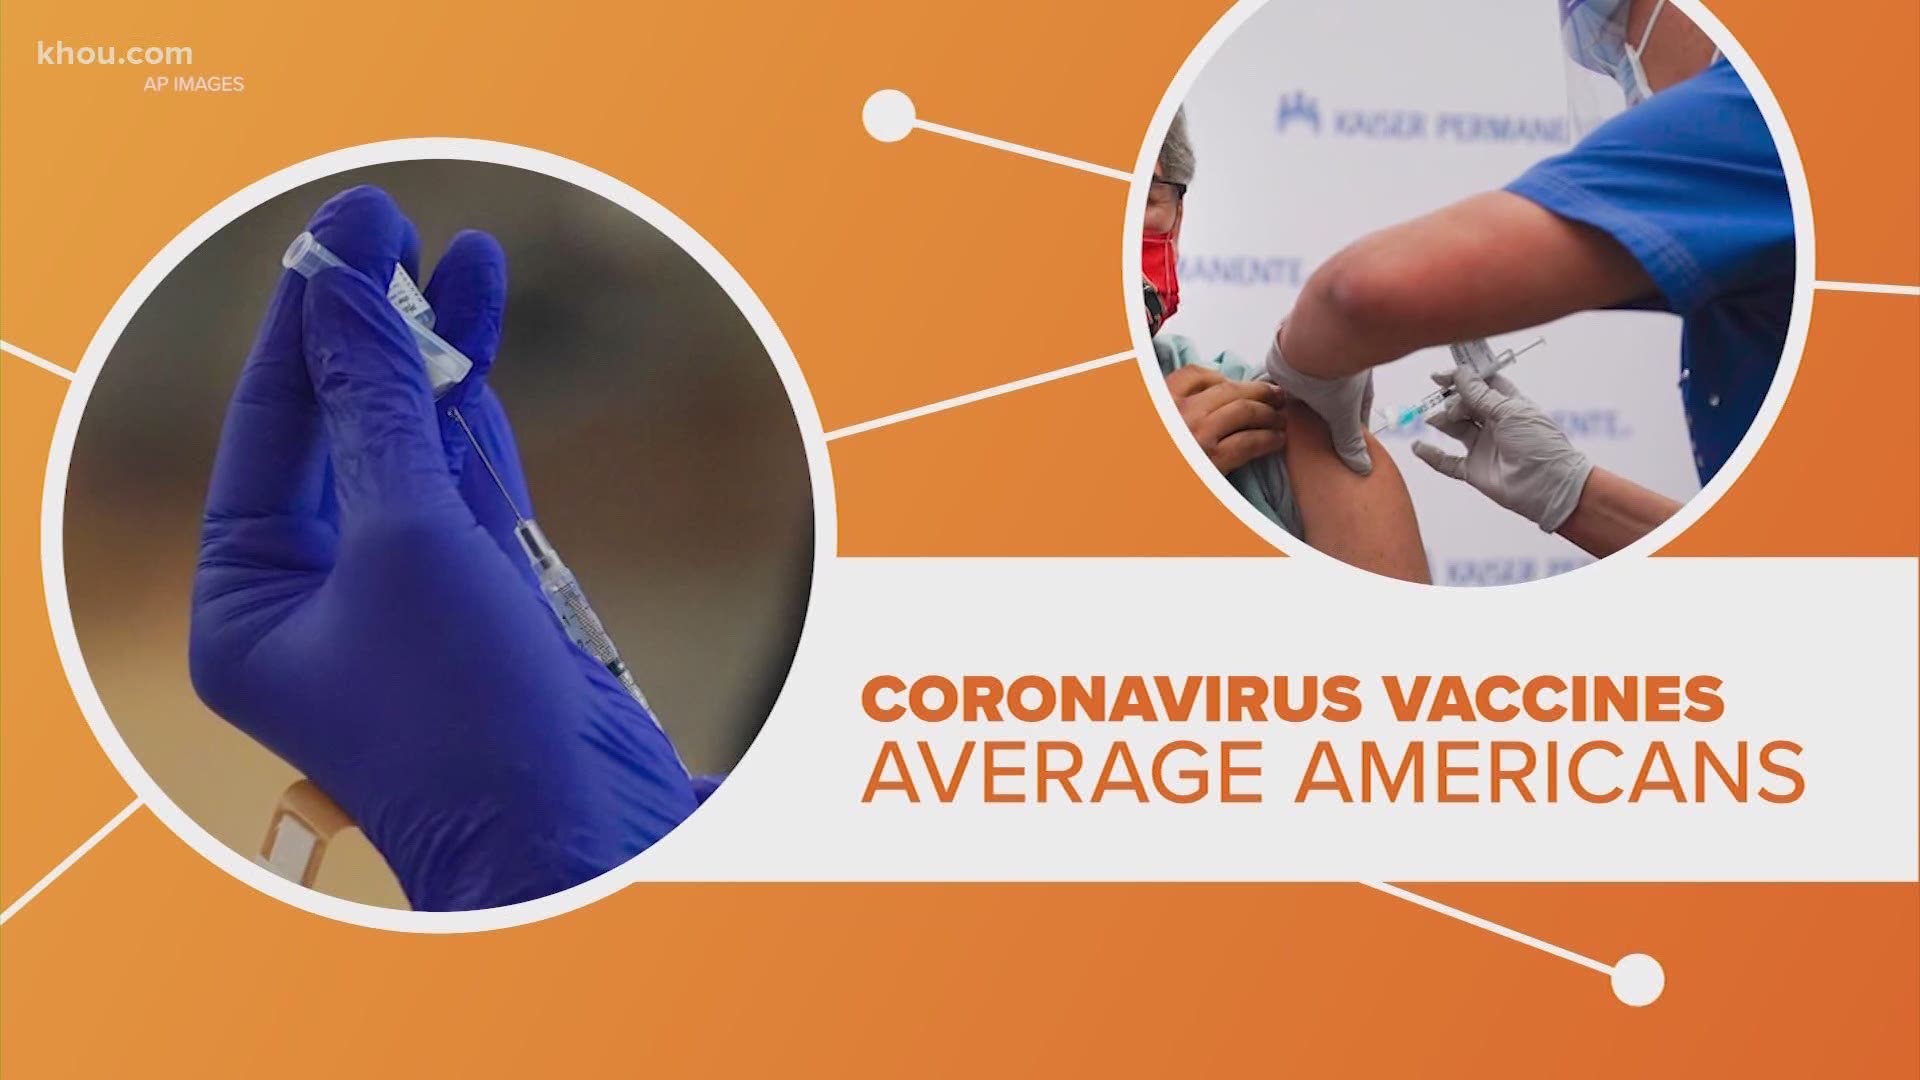 Now that vaccinations for coronavirus have started in the U.S., how soon will average Americans be able to get the shot? Let’s connect the dots.